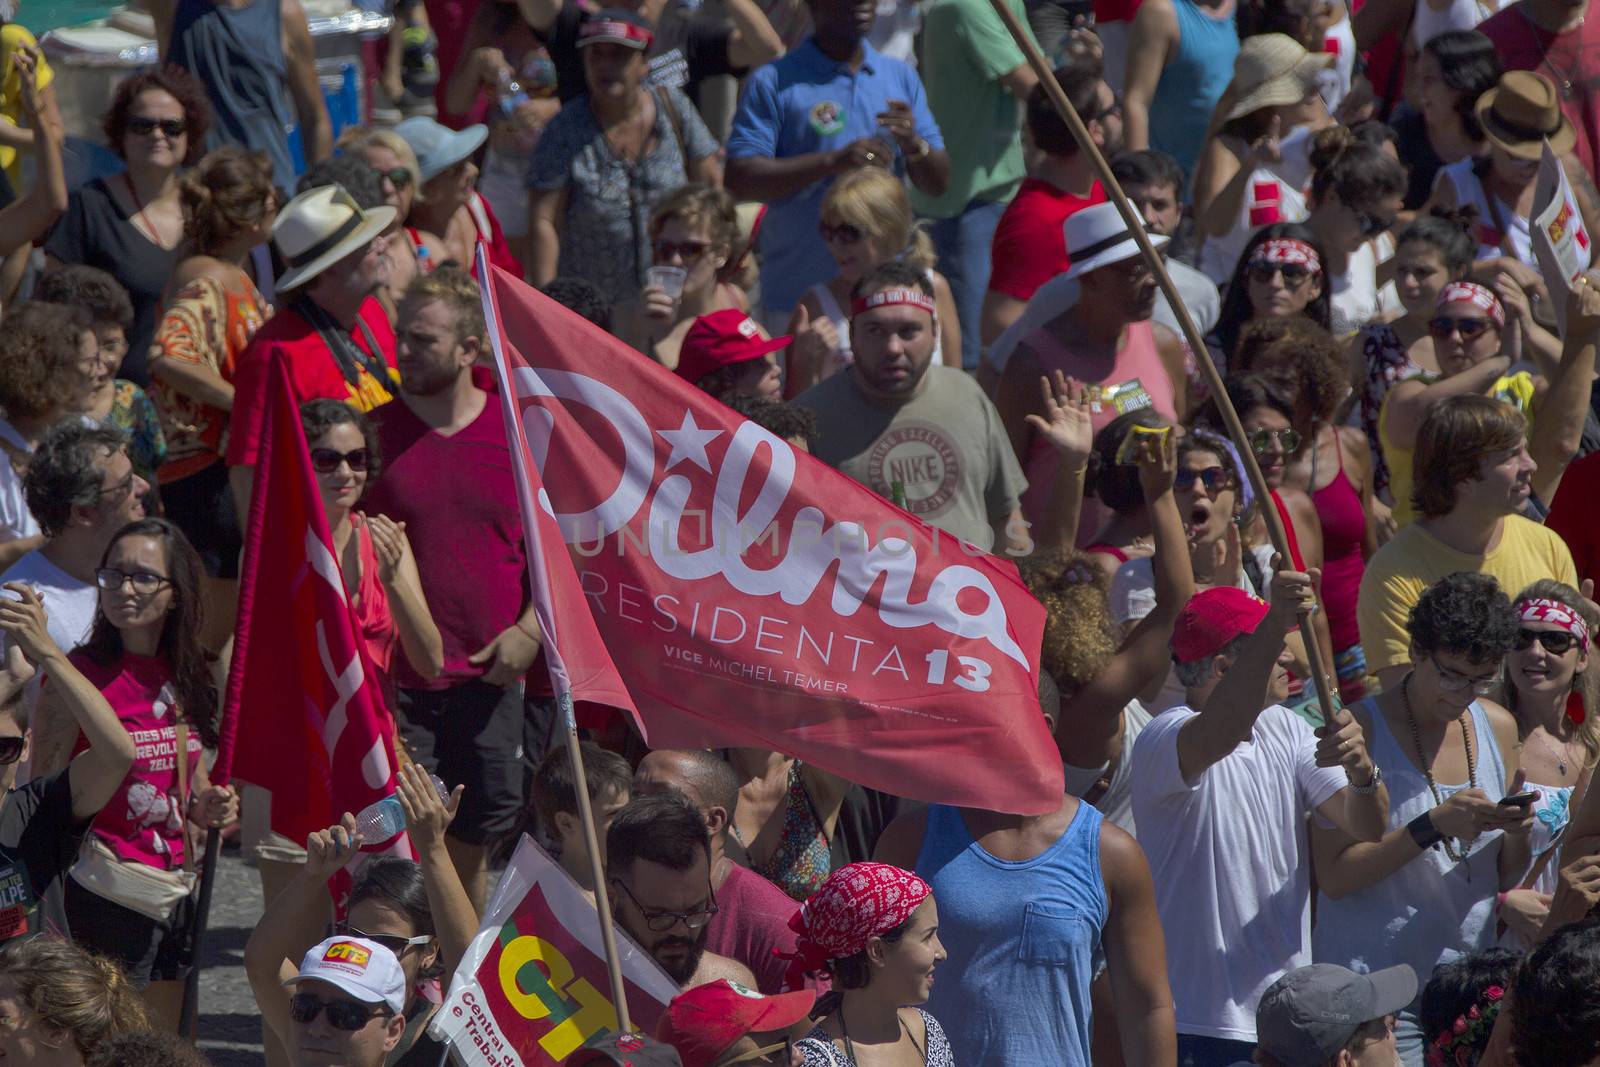 BRAZIL, Rio de Janeiro: A protester waves a Dilma flag at a pro-Rousseff march in Rio de Janeiro, Brazil on April 17, 2016.Rousseff faces an impeachment vote today over charges of manipulating government accounts. Brazil's lower house is voting on whether to continue impeachment proceedings. 342 out of 513 votes are needed to continue the proceedings to the upper house.